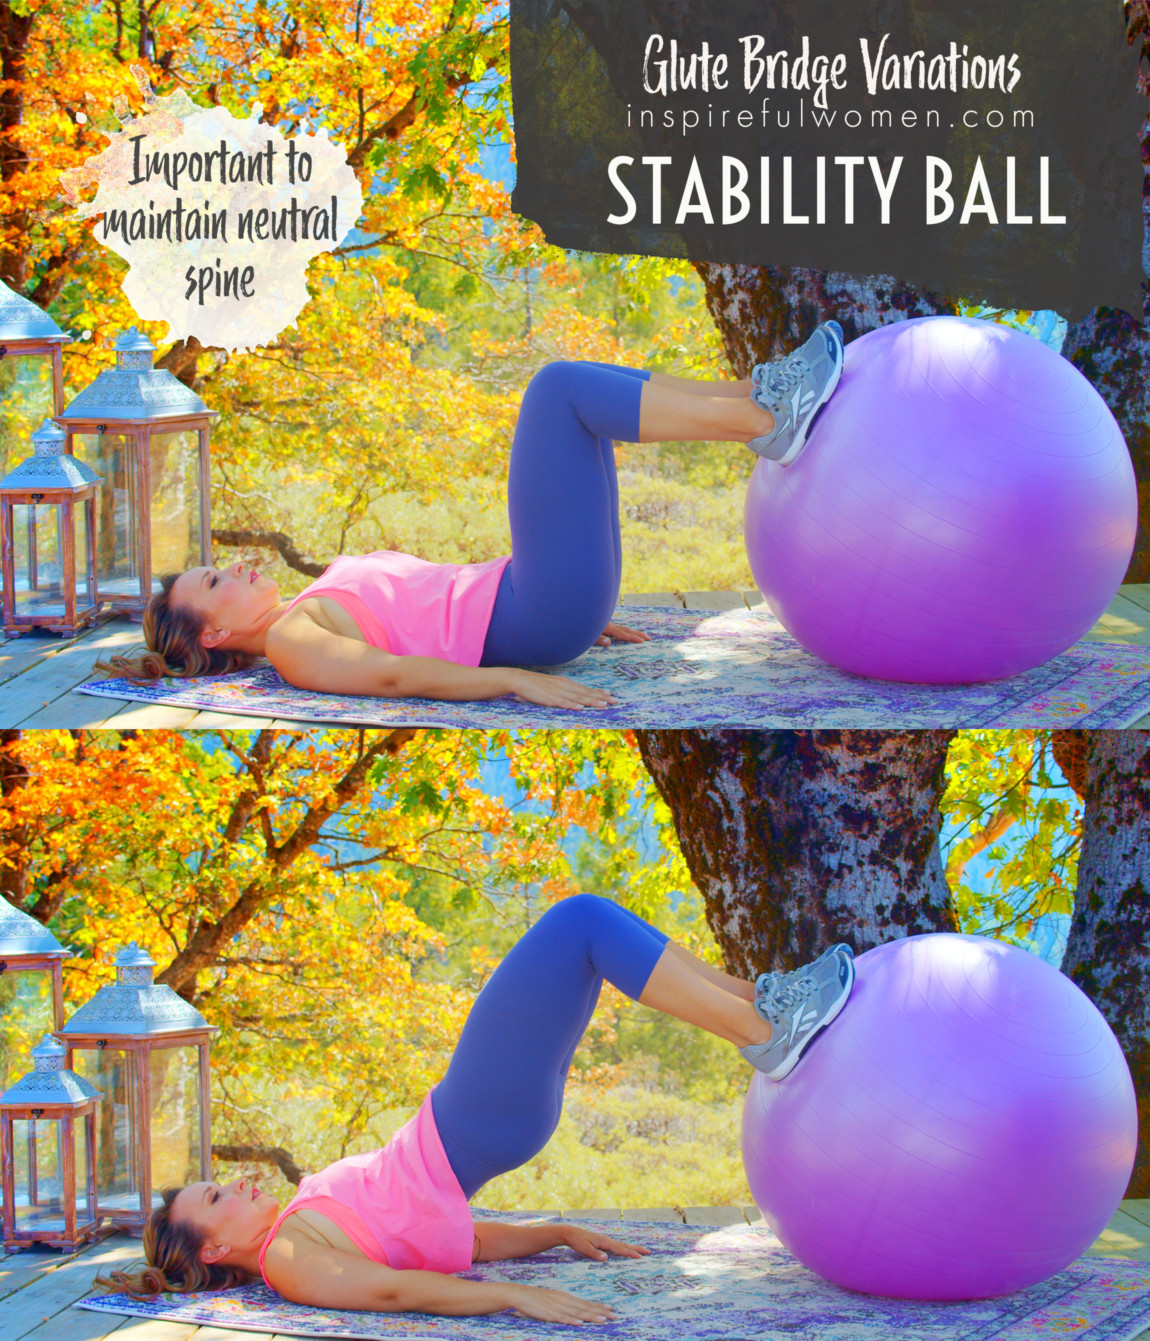 stability-ball-glute-bridge-exercise-variation-maintain-neutral-spine